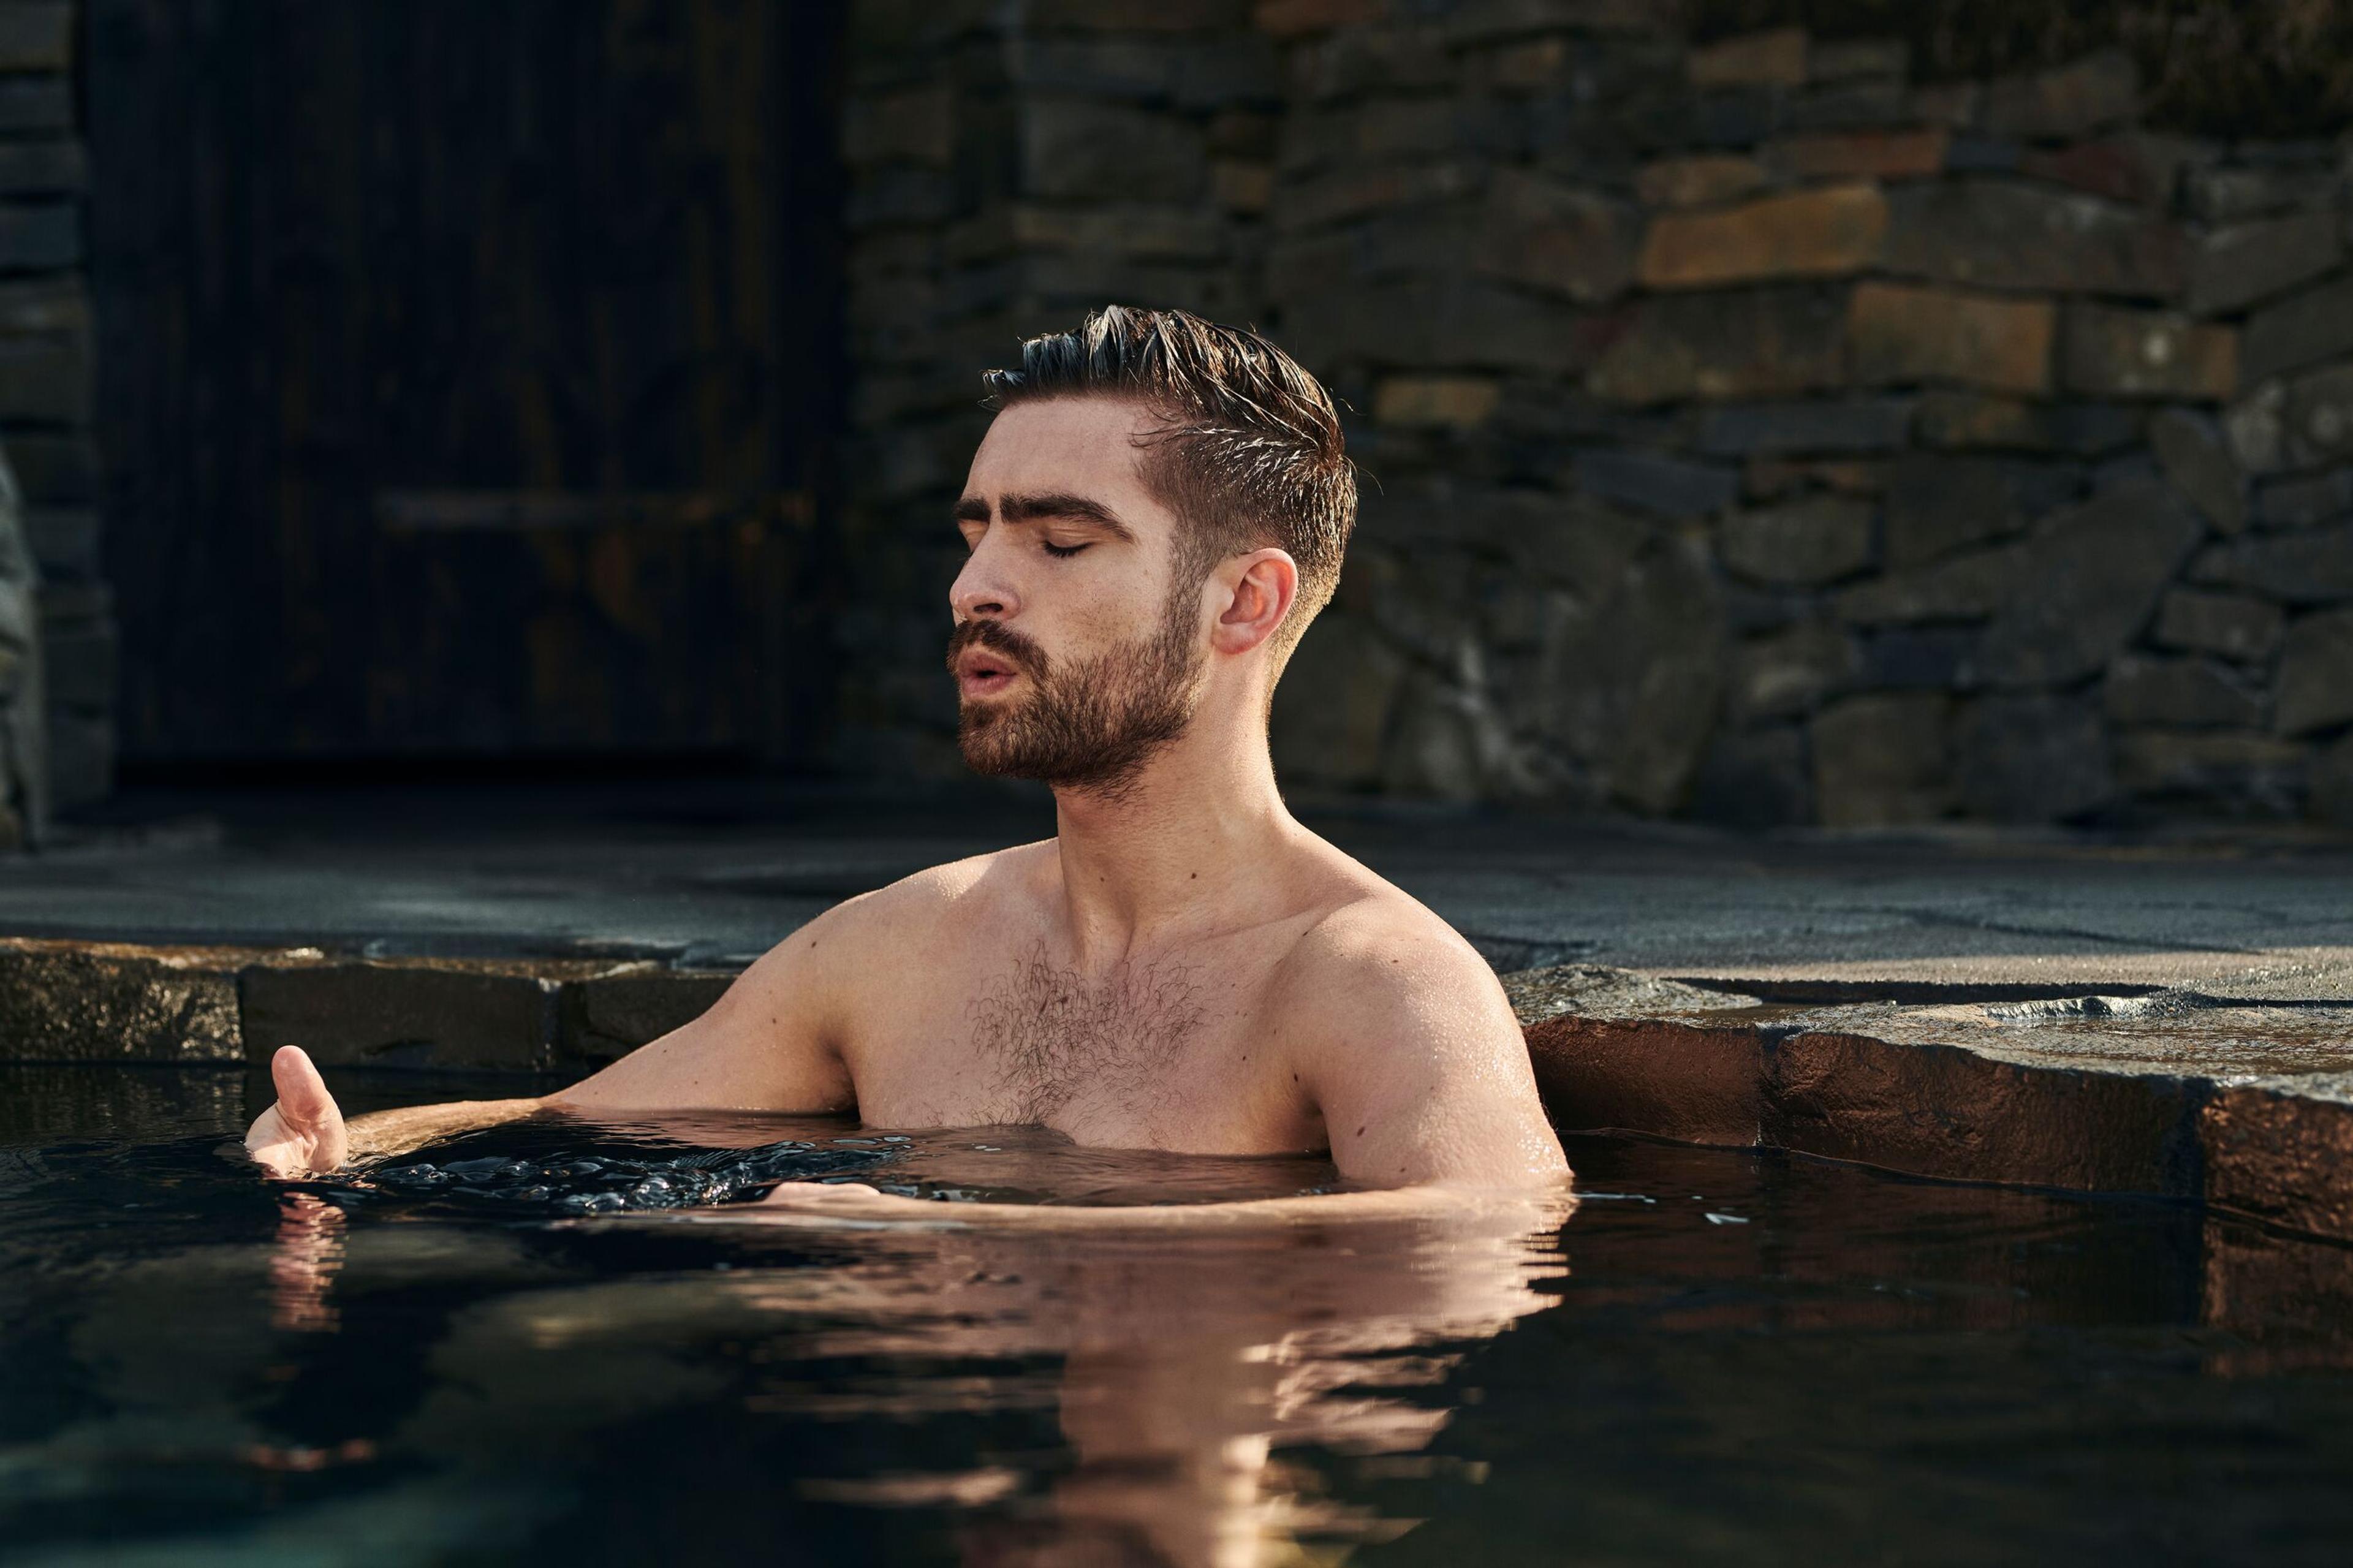 A man relaxing in the cold pool with his eyes closed, against a backdrop of stone walls, embodying a moment of peaceful contemplation.